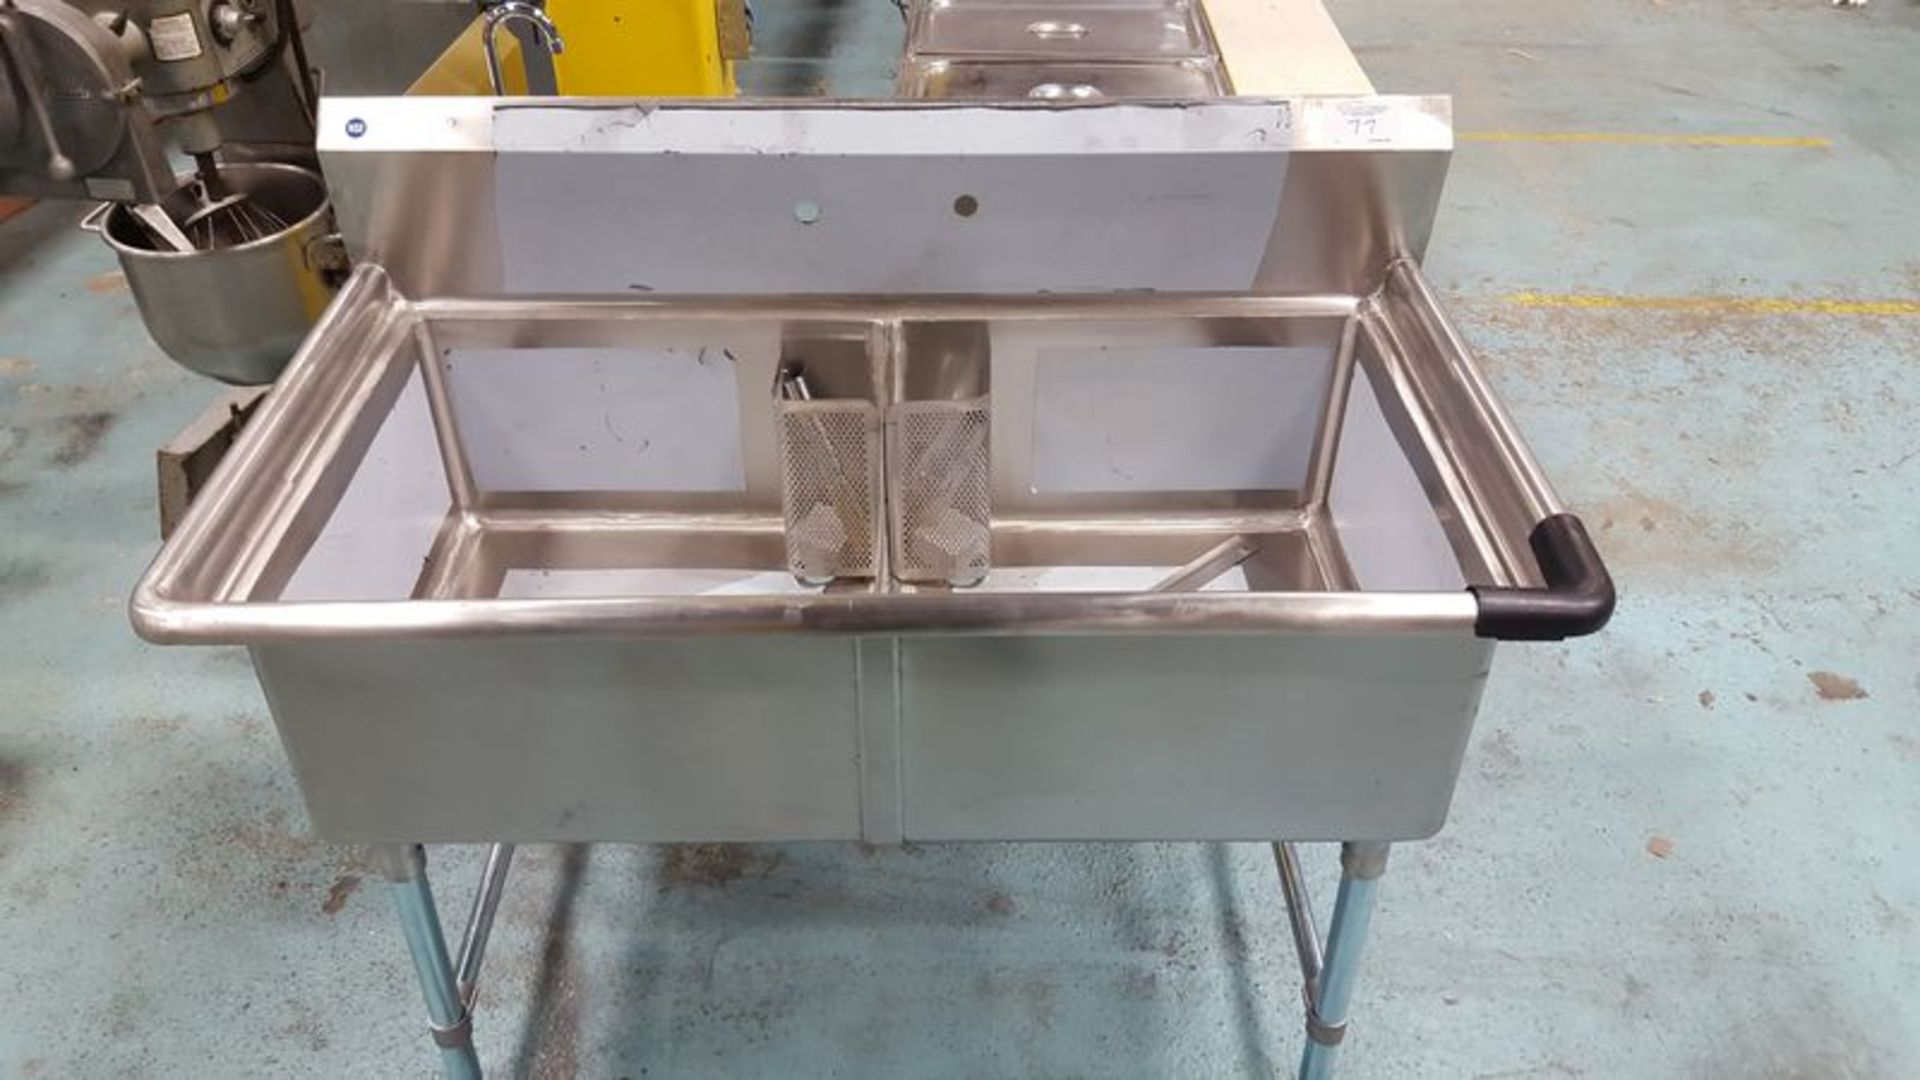 Unused 54" - 2 compartment stainless steel sink